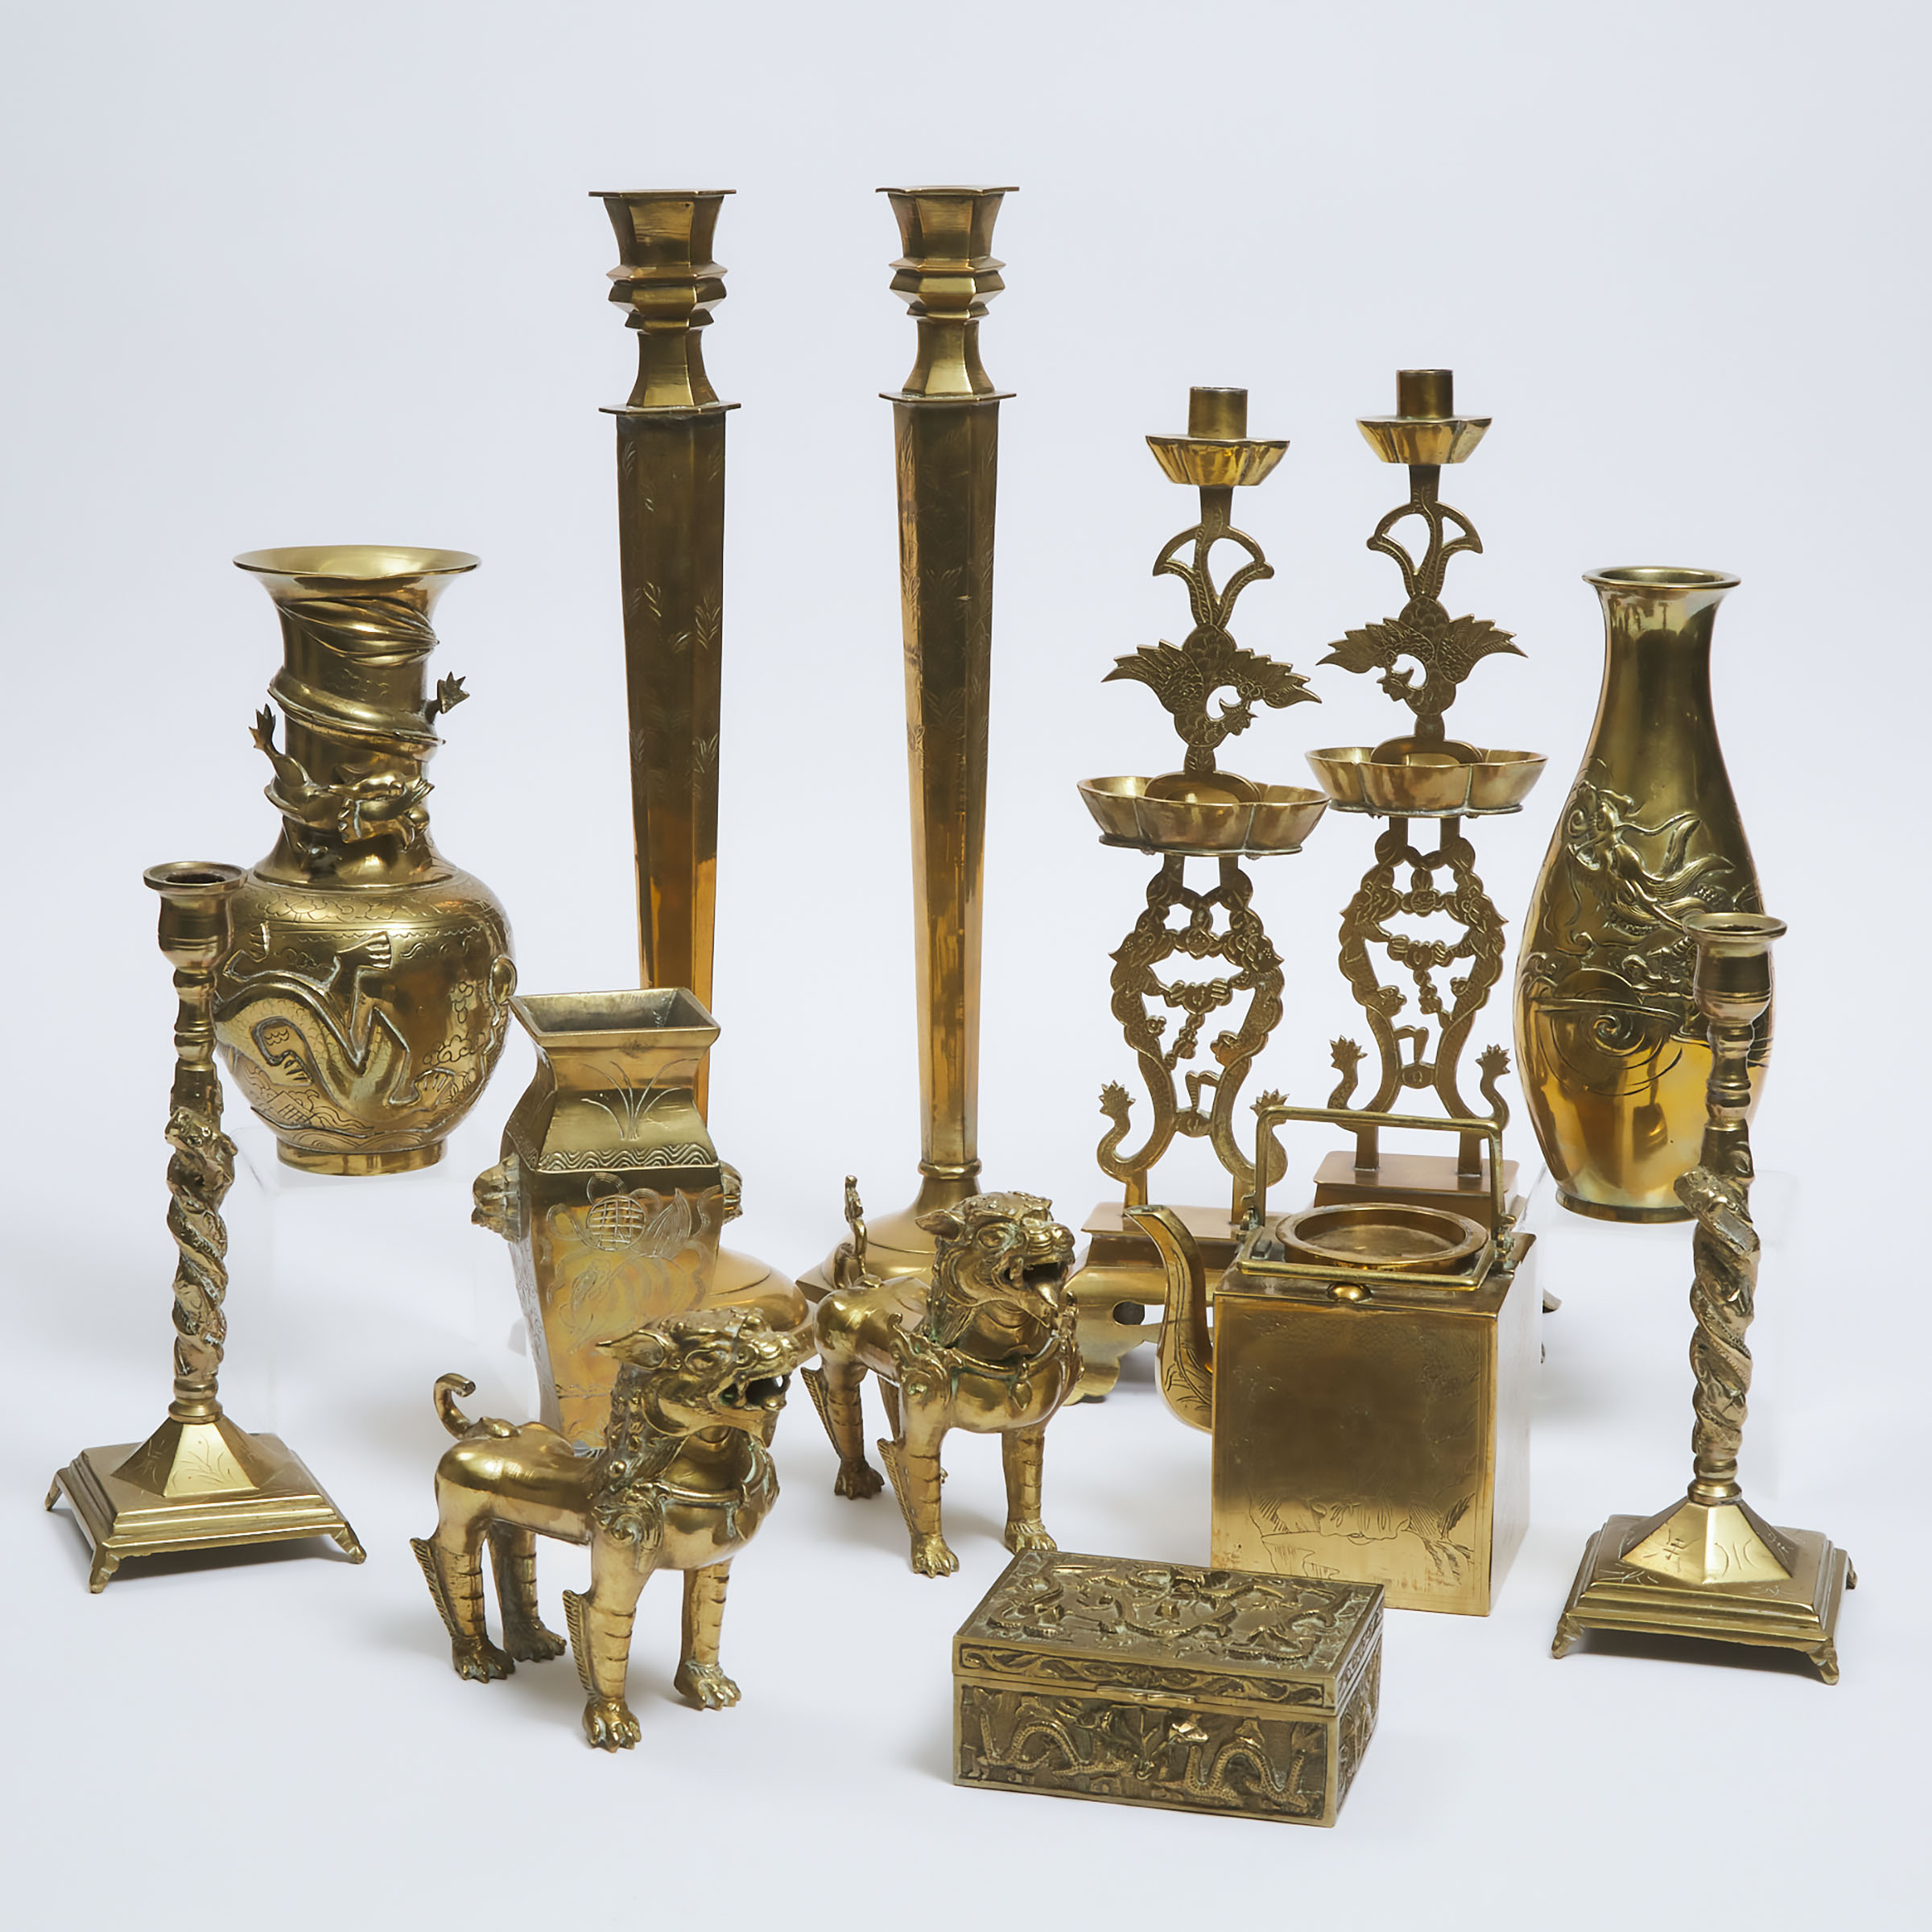 A Group of Thirteen Chinese Brass Candlesticks, Vases, and Other Wares, Early to Mid 20th Century